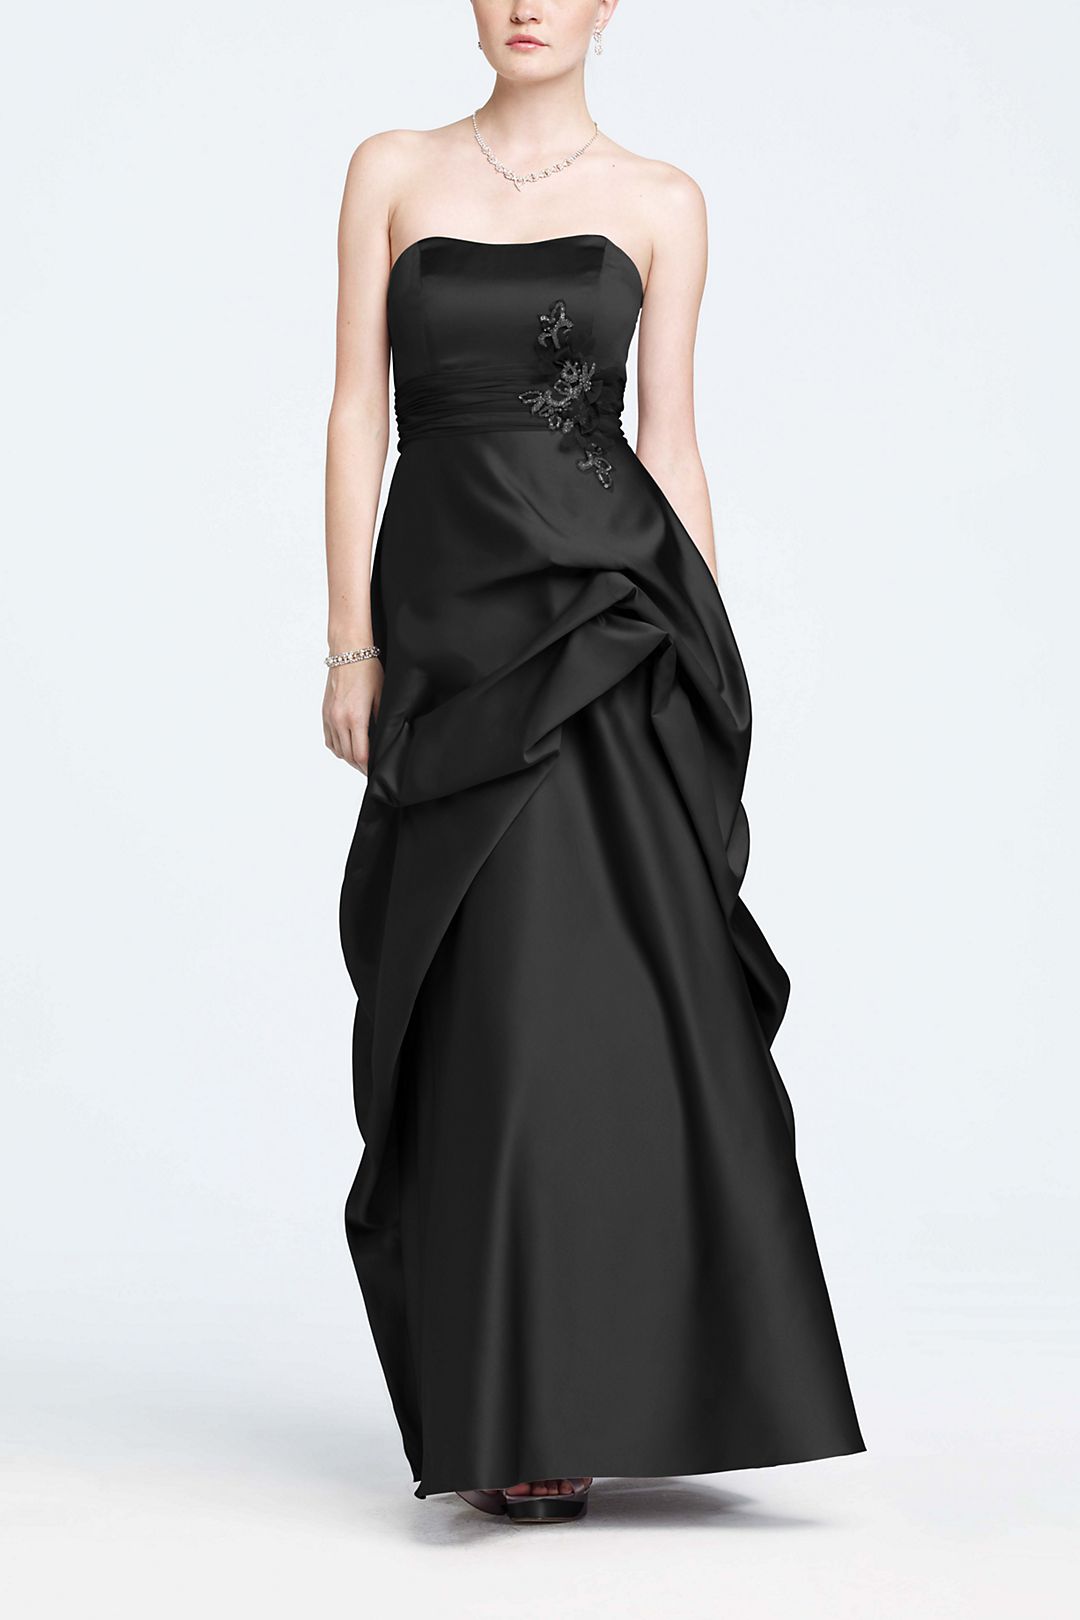 Strapless Satin and Organza Side Pick-Up Ball Gown Image 1